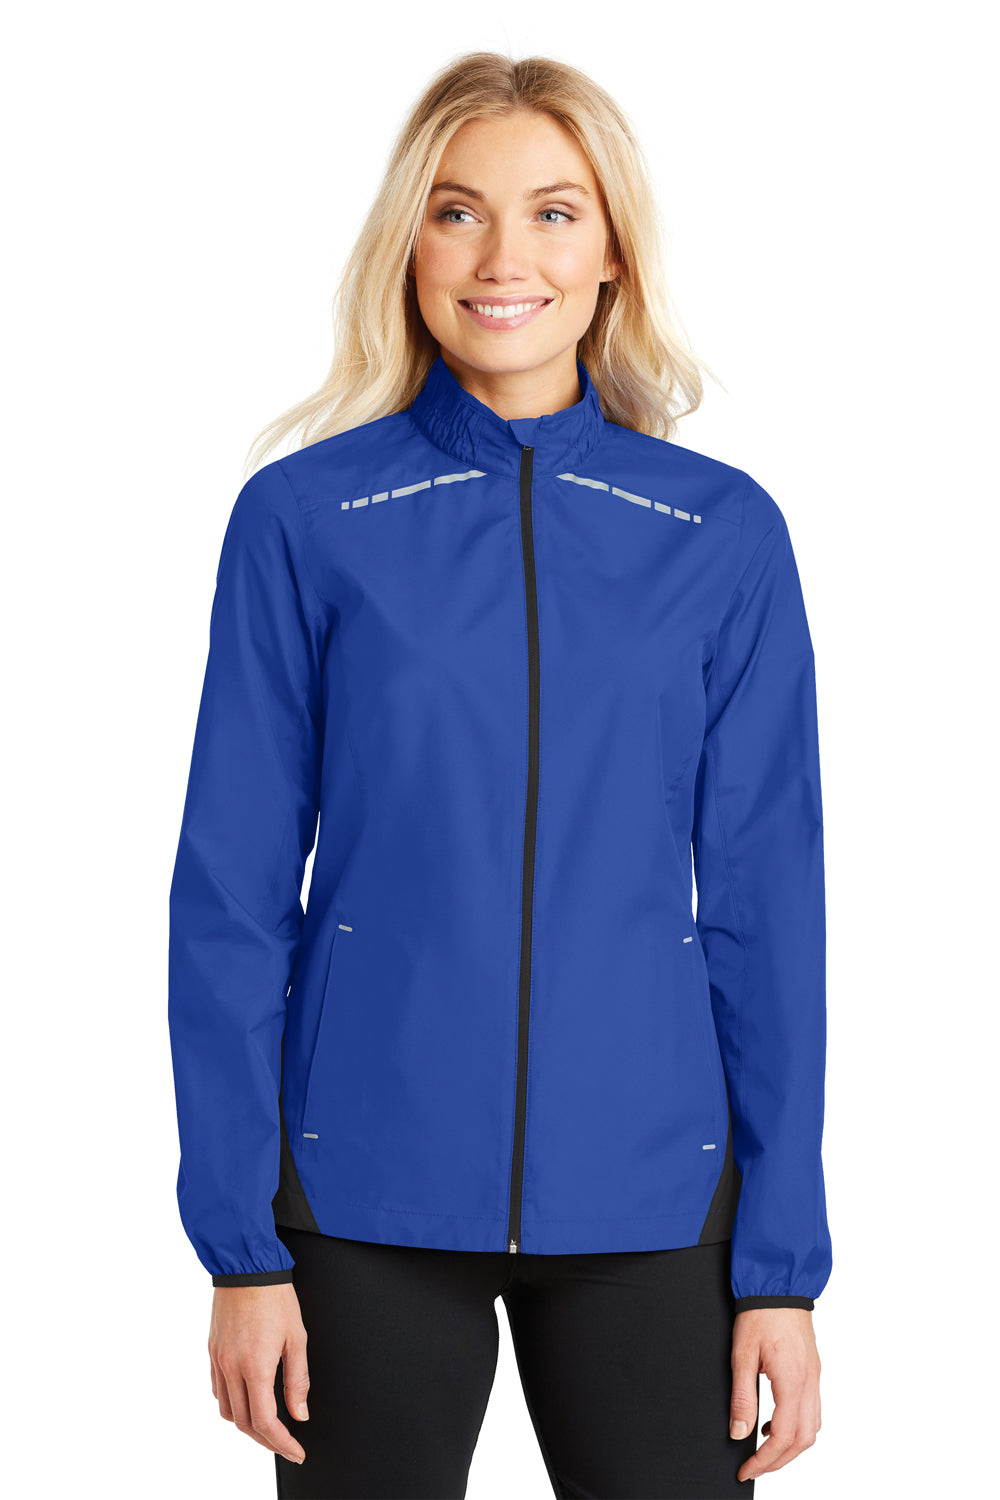 Port Authority L345 Womens Zephyr Reflective Hit Wind & Water Resistant Full Zip Jacket Royal Blue Front